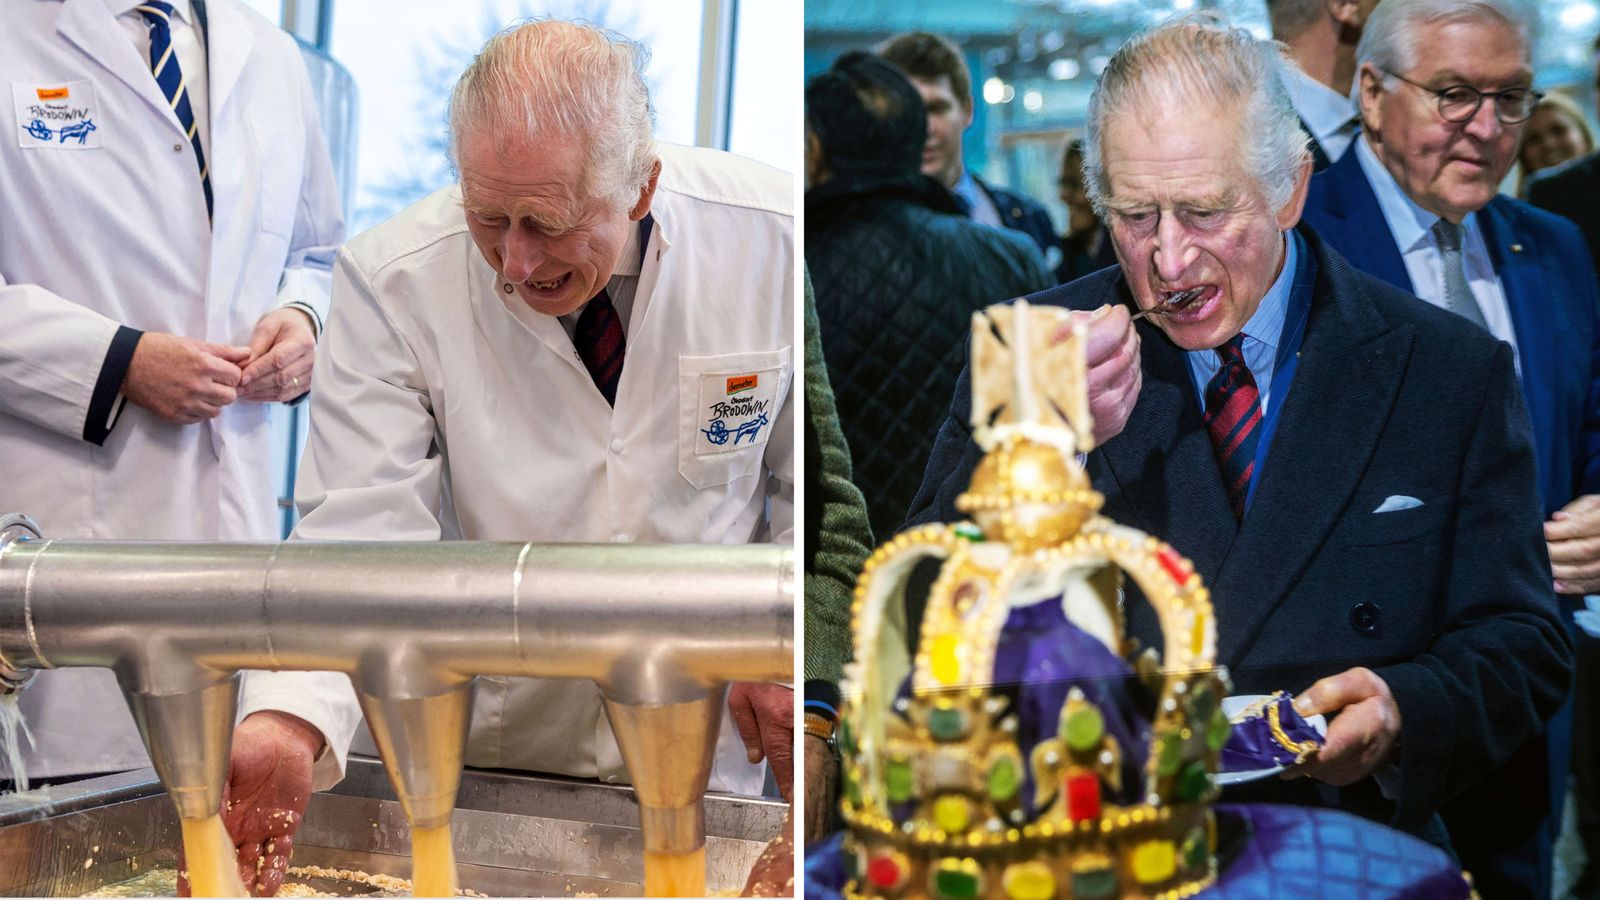 King gets stuck into making cheese on Germany visit - then eats cake shaped like a crown